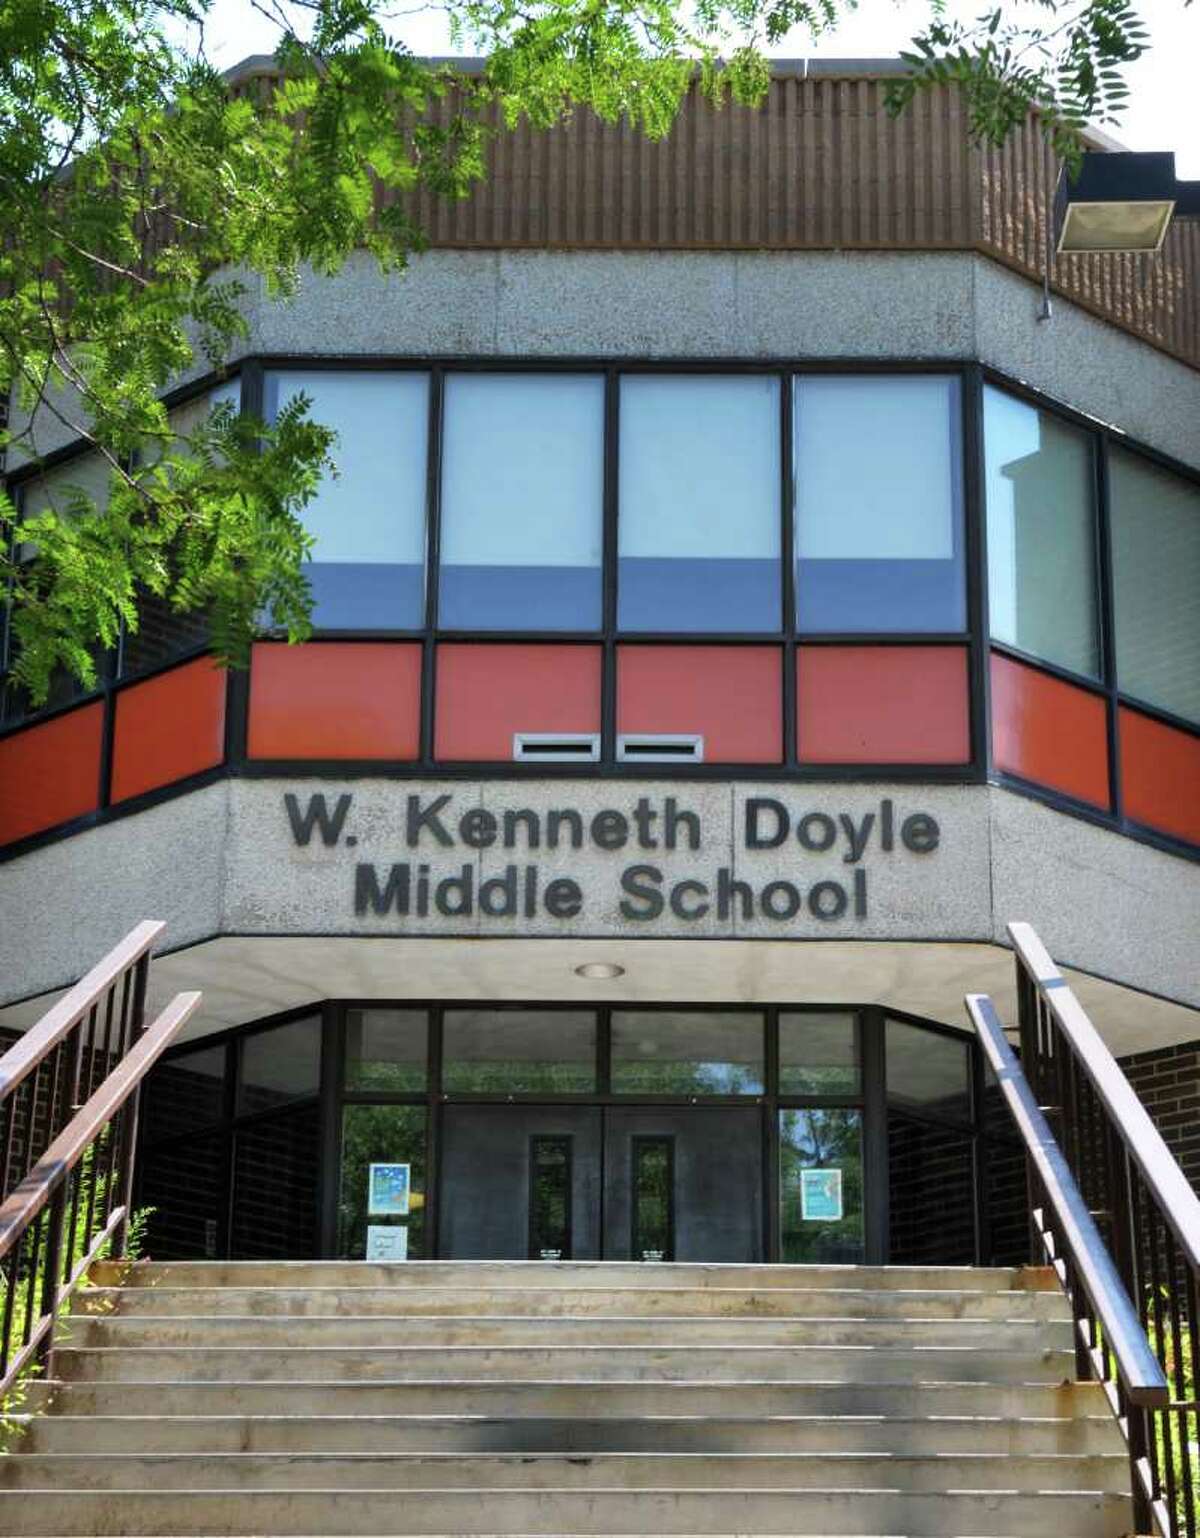 Entrance to Doyle Middle School in Troy Tuesday Aug. 2, 2011. (John Carl D'Annibale / Times Union)